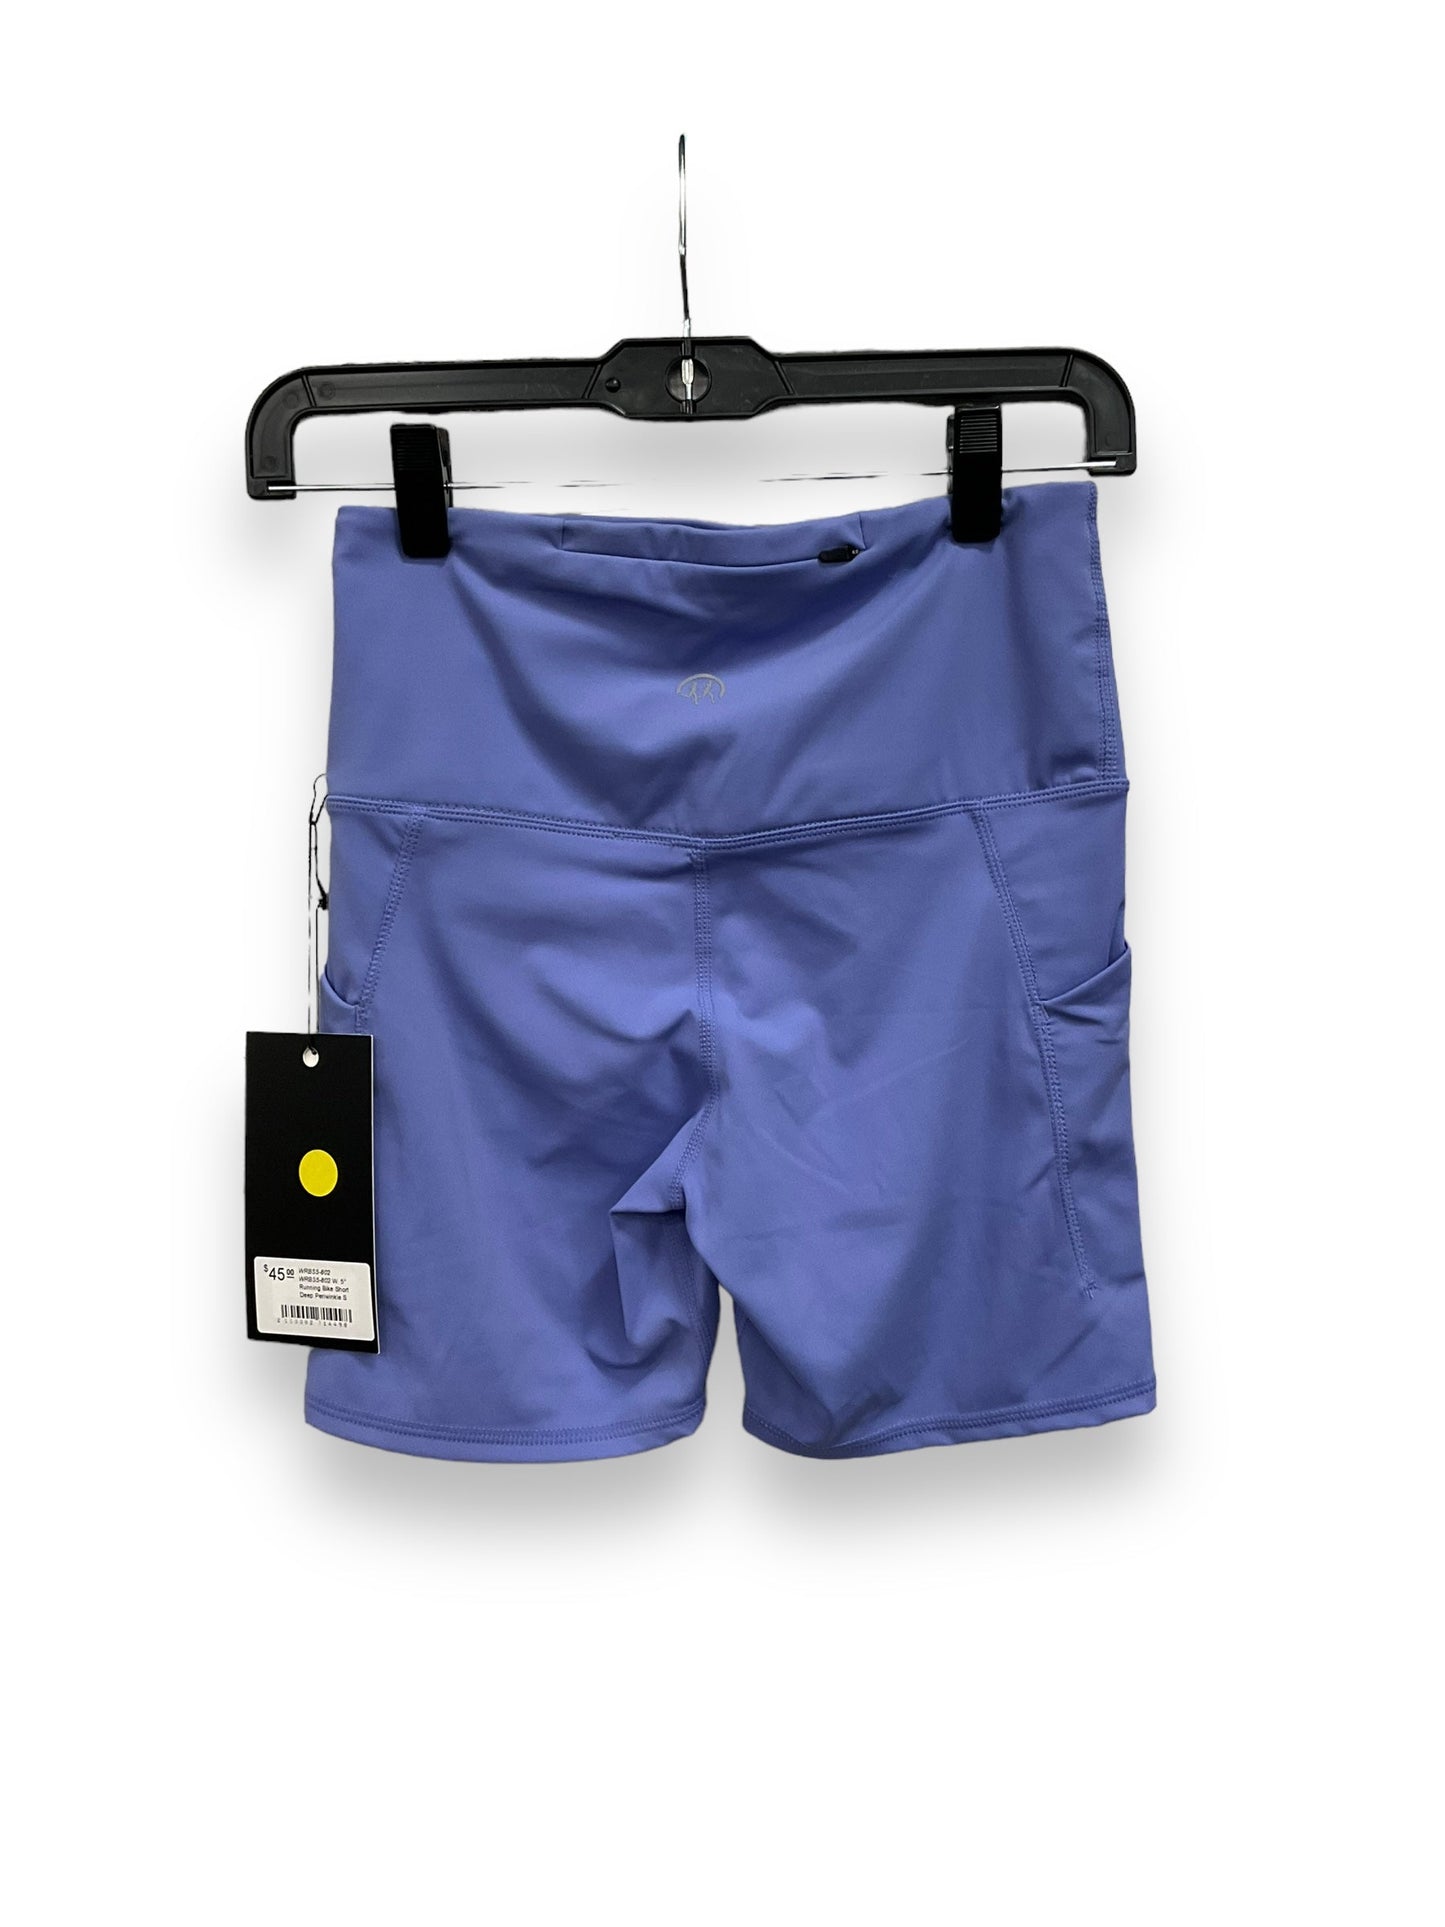 Blue Athletic Shorts Clothes Mentor, Size S